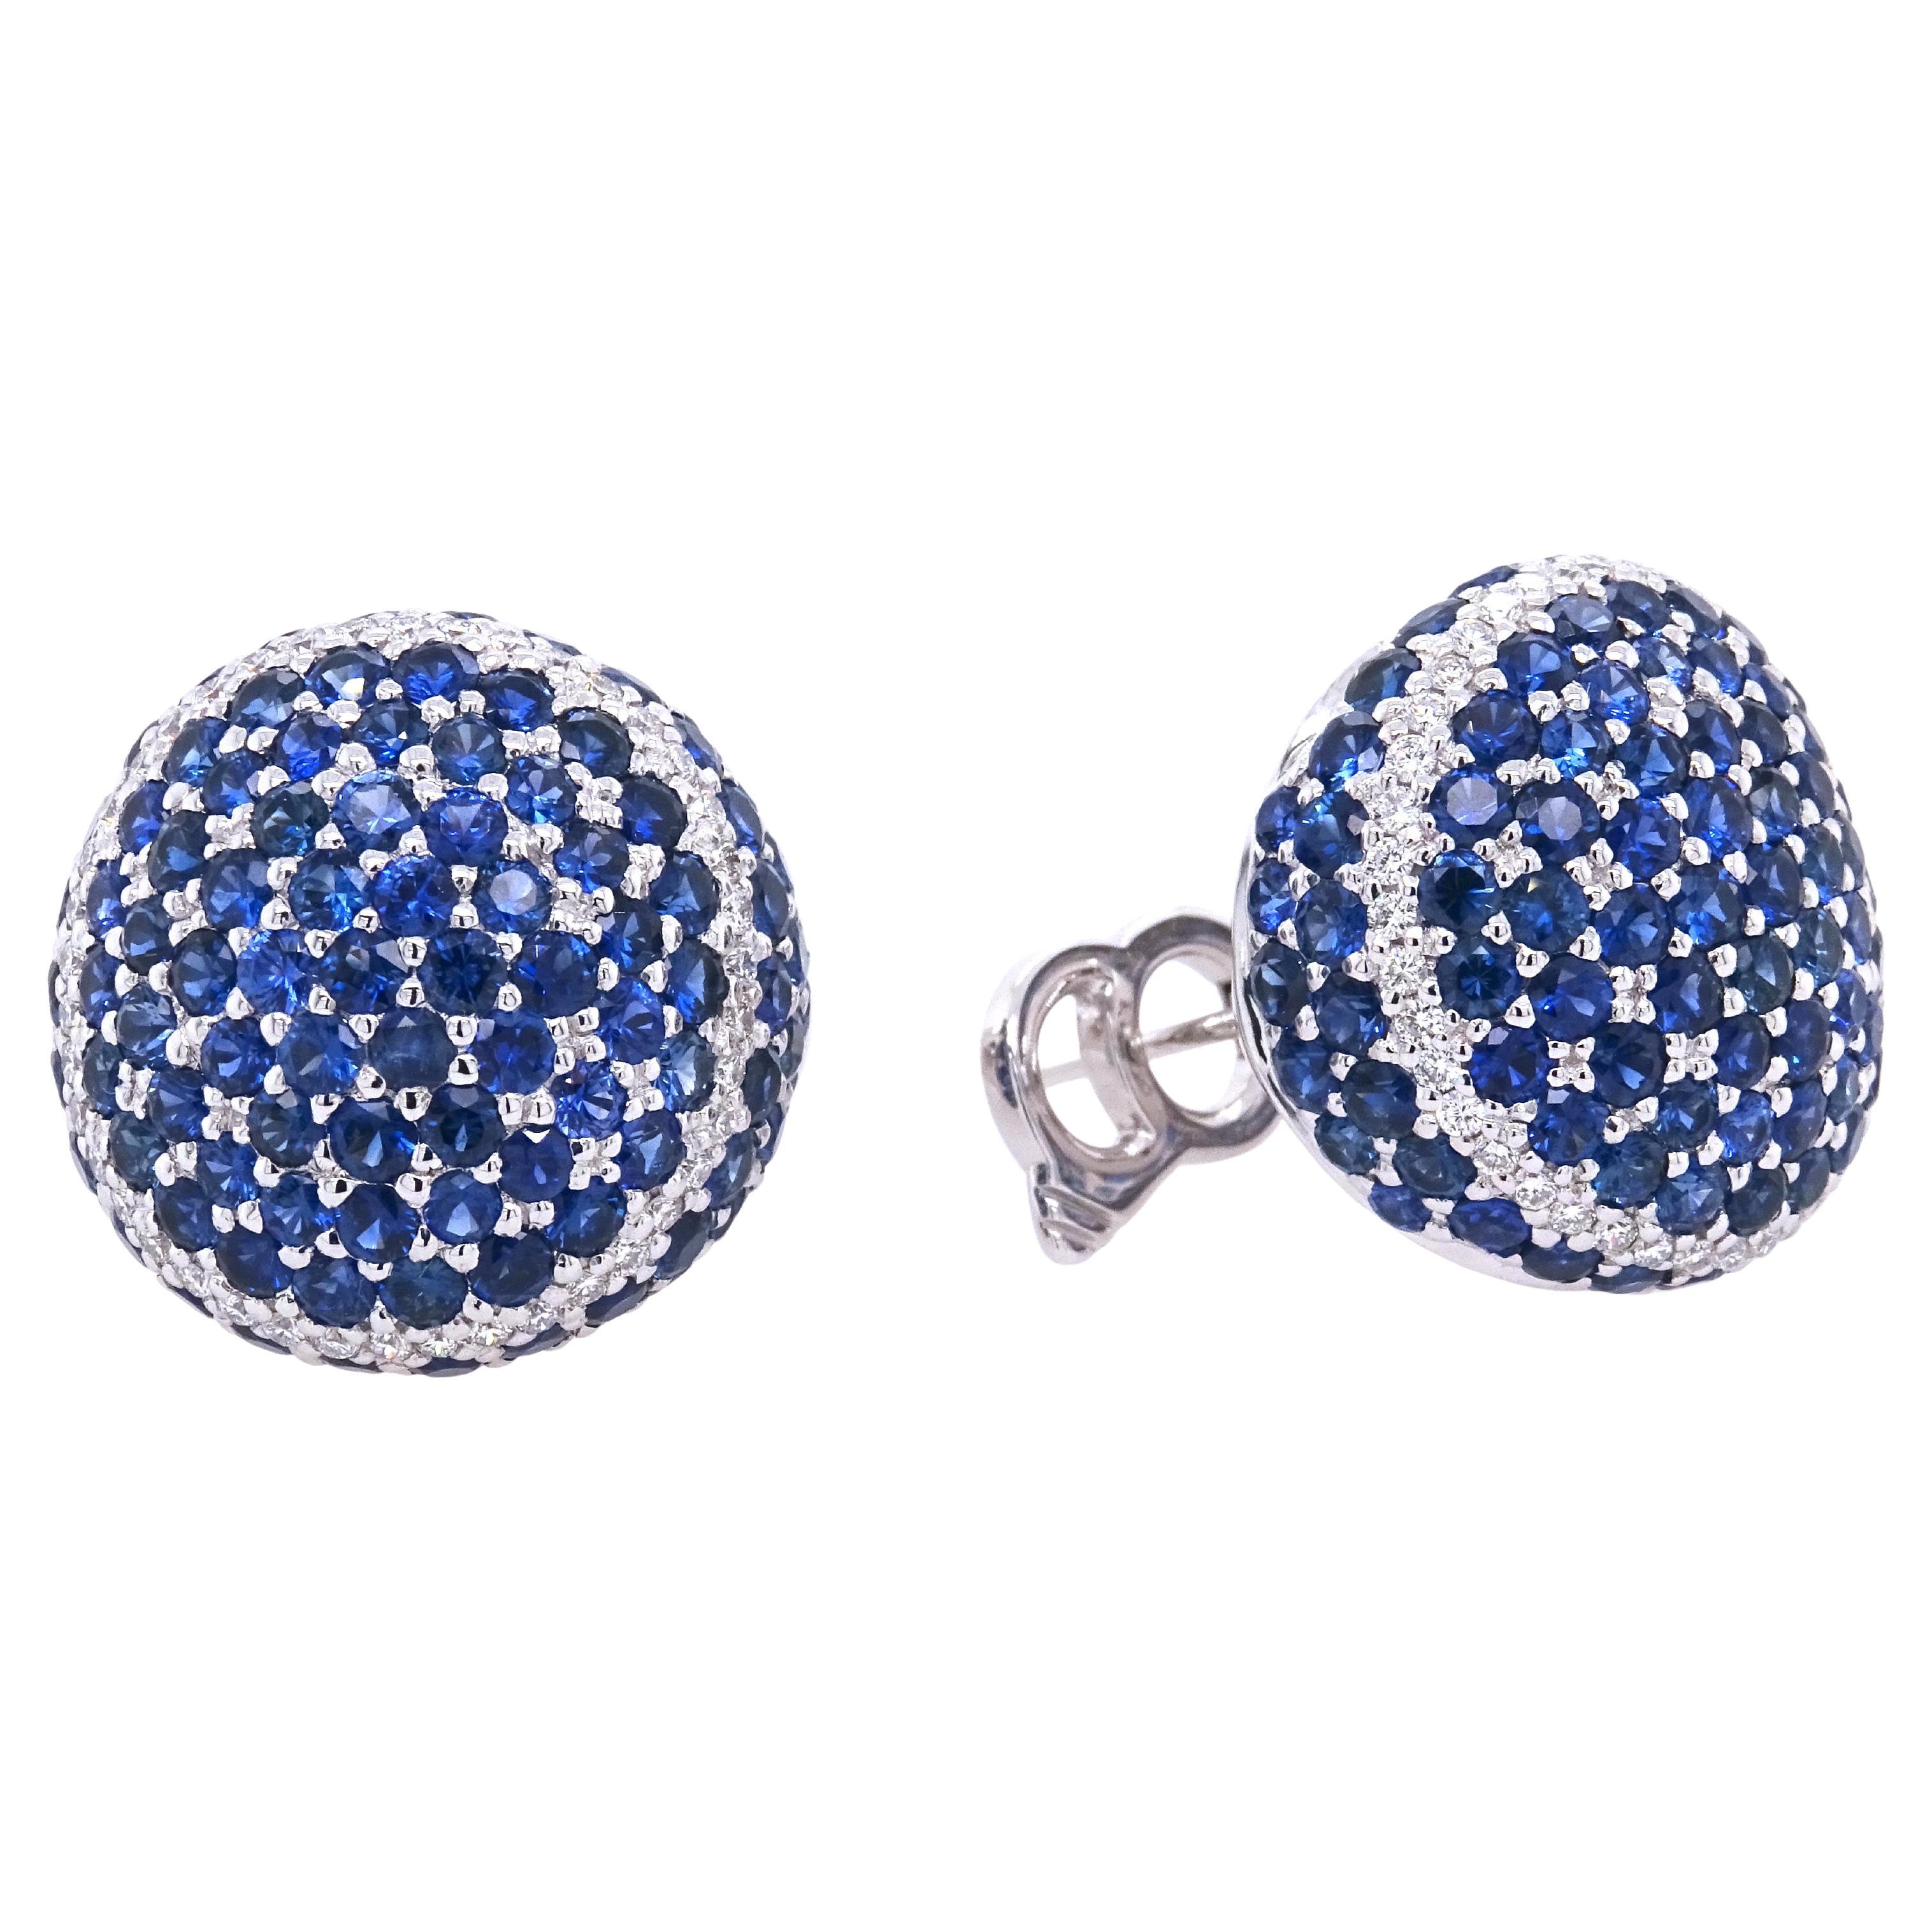 Diamonds and Blue Sapphire Earrings in 18K White Gold